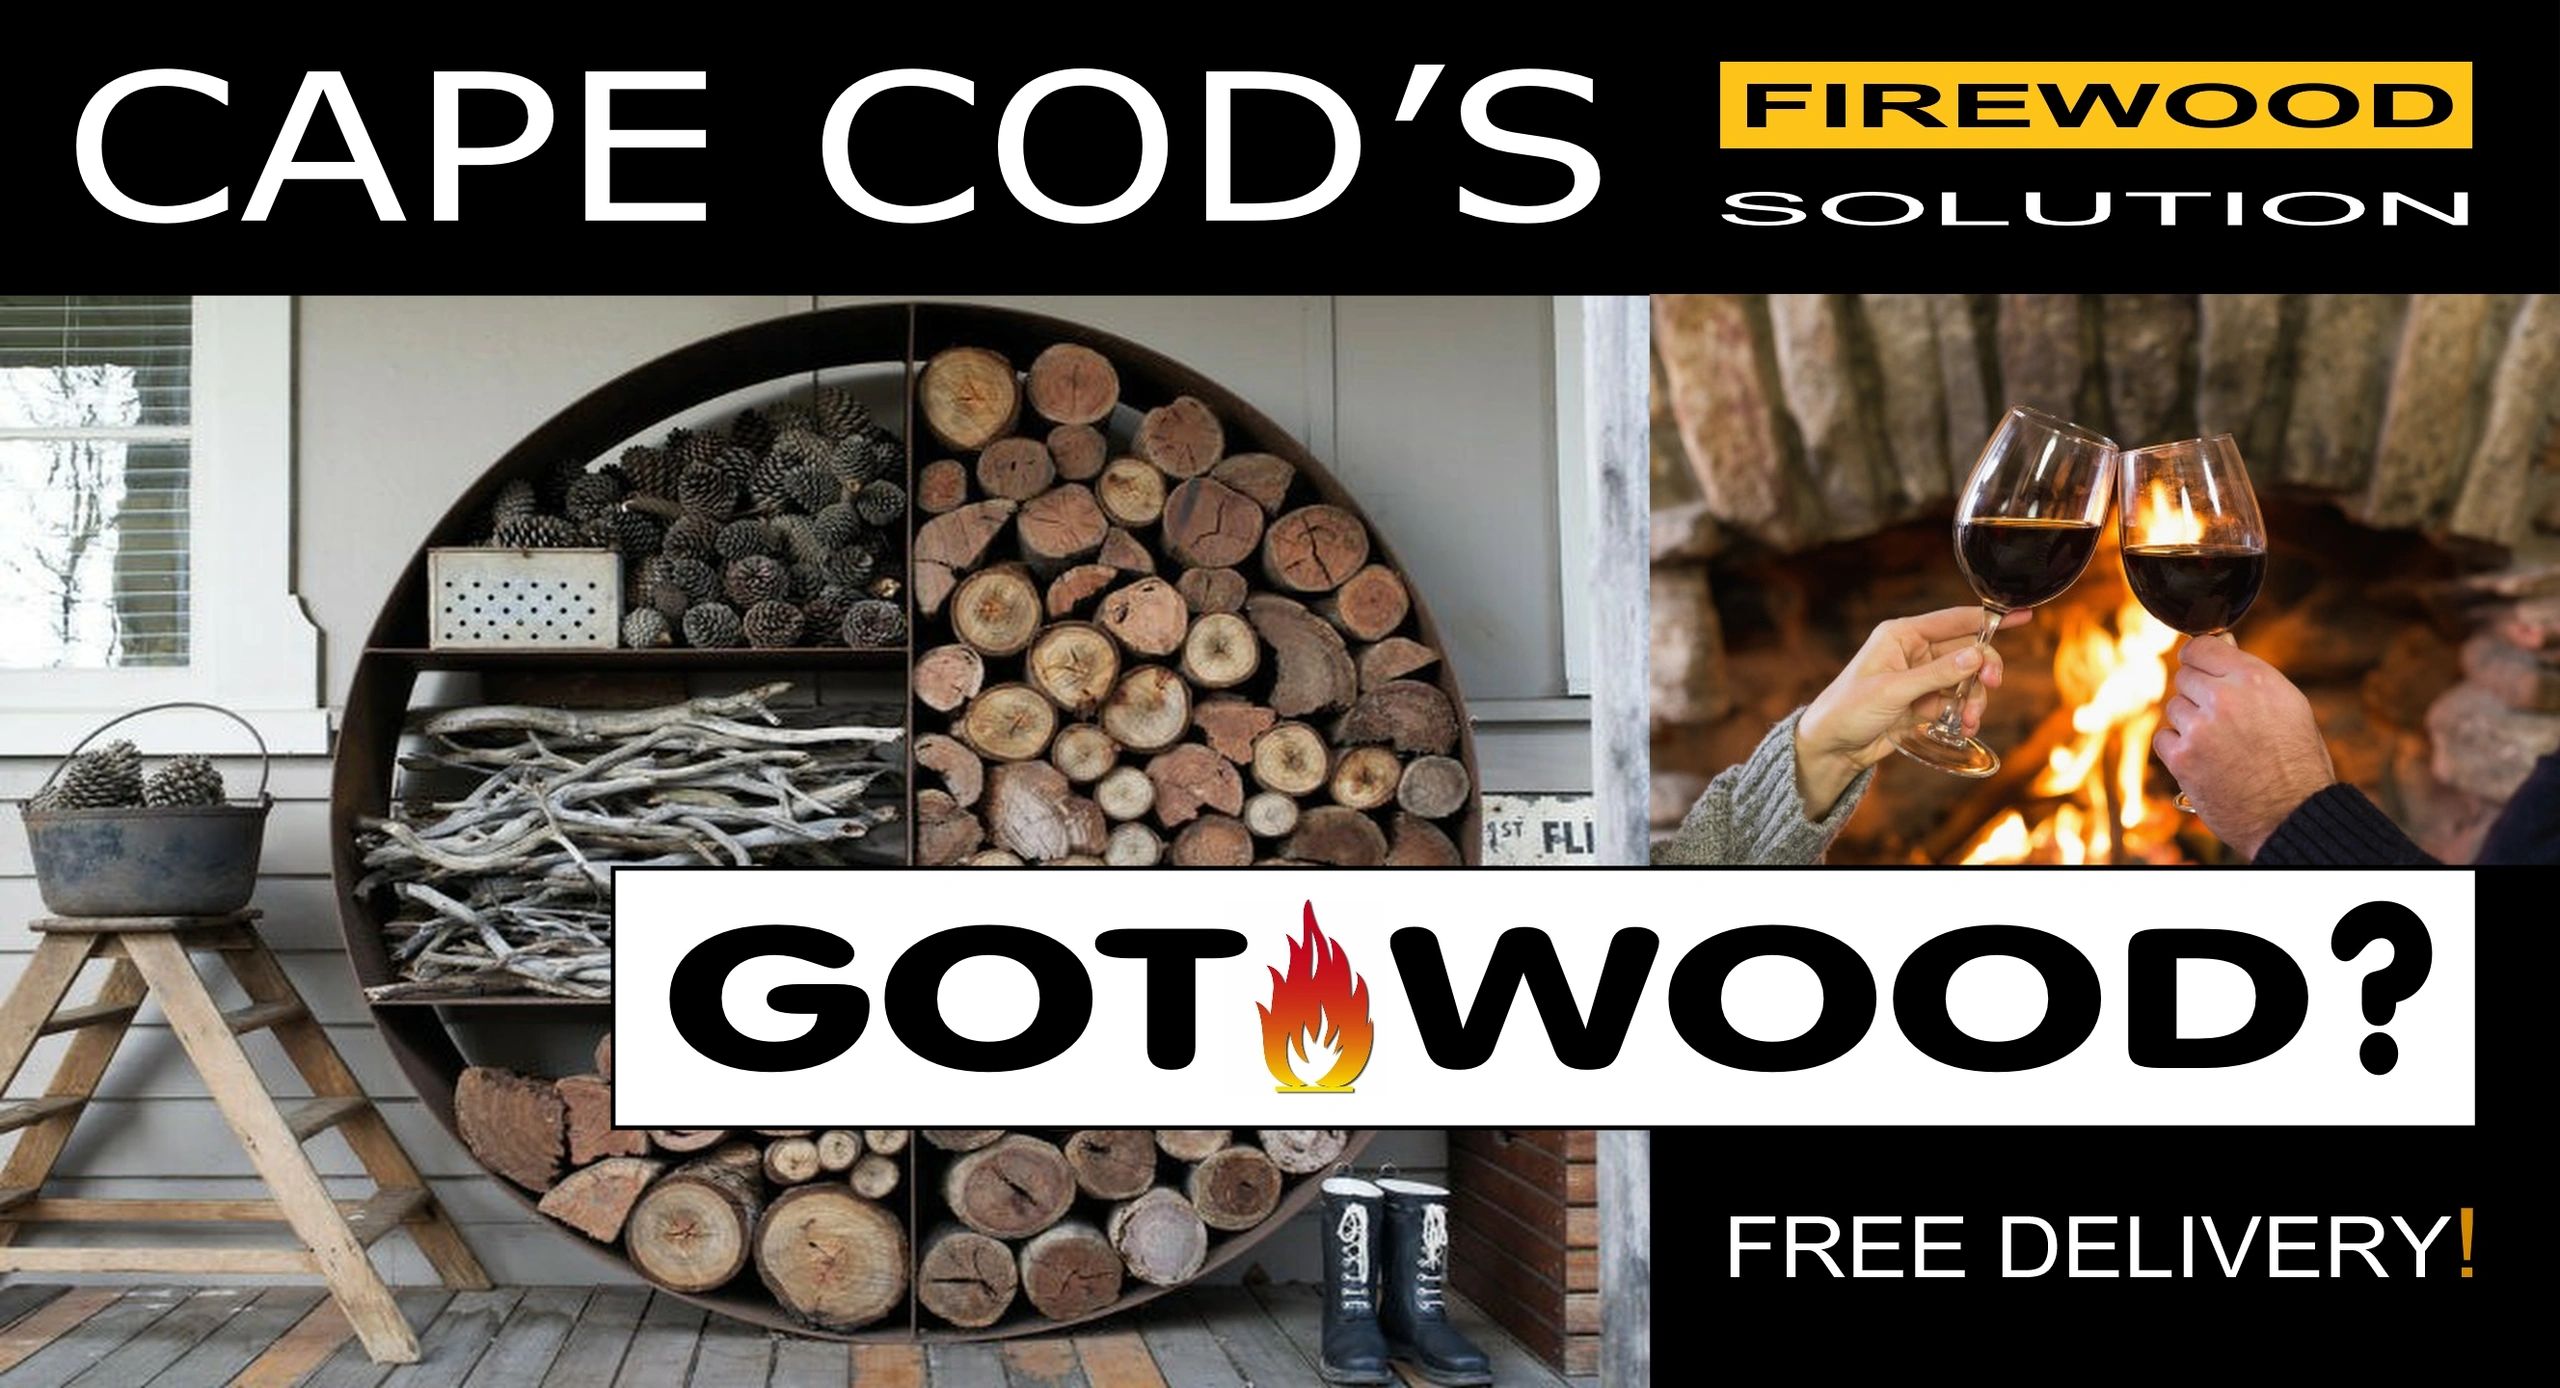 firewood on cape cod, free delivery on firewood, we have many options of firewood.